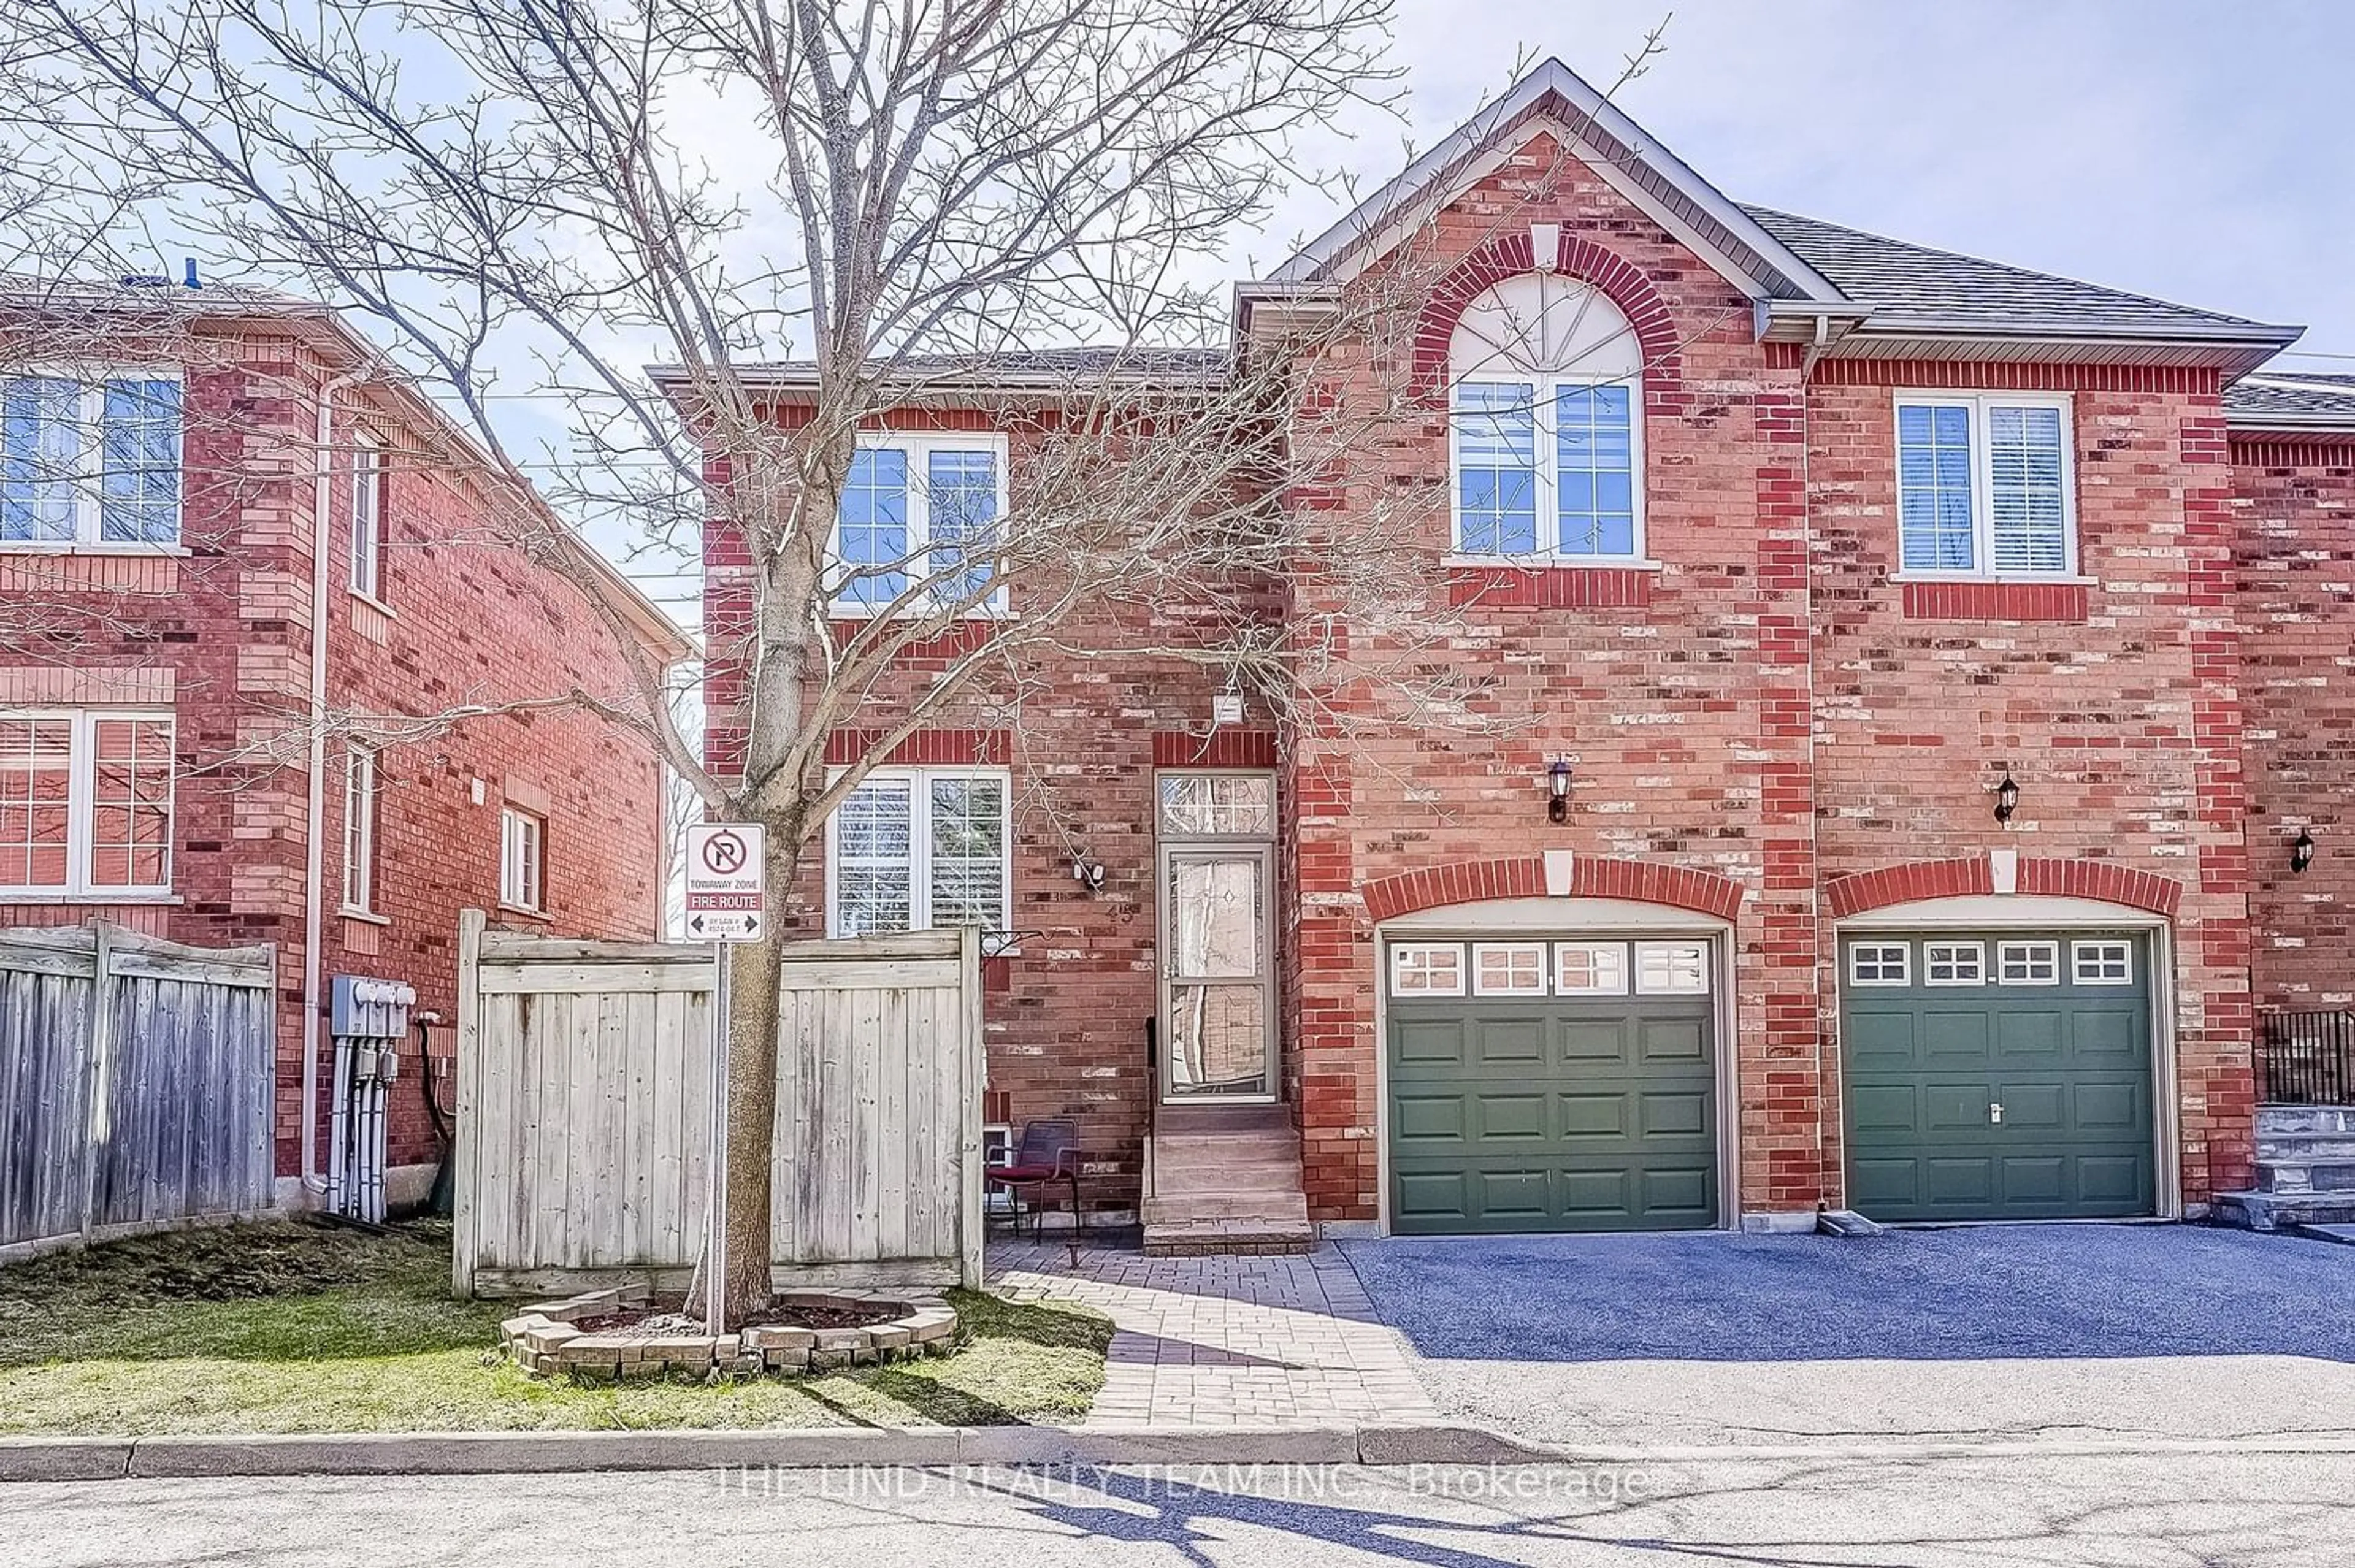 Home with brick exterior material for 45 Sandlewood Crt, Aurora Ontario L4G 7N2